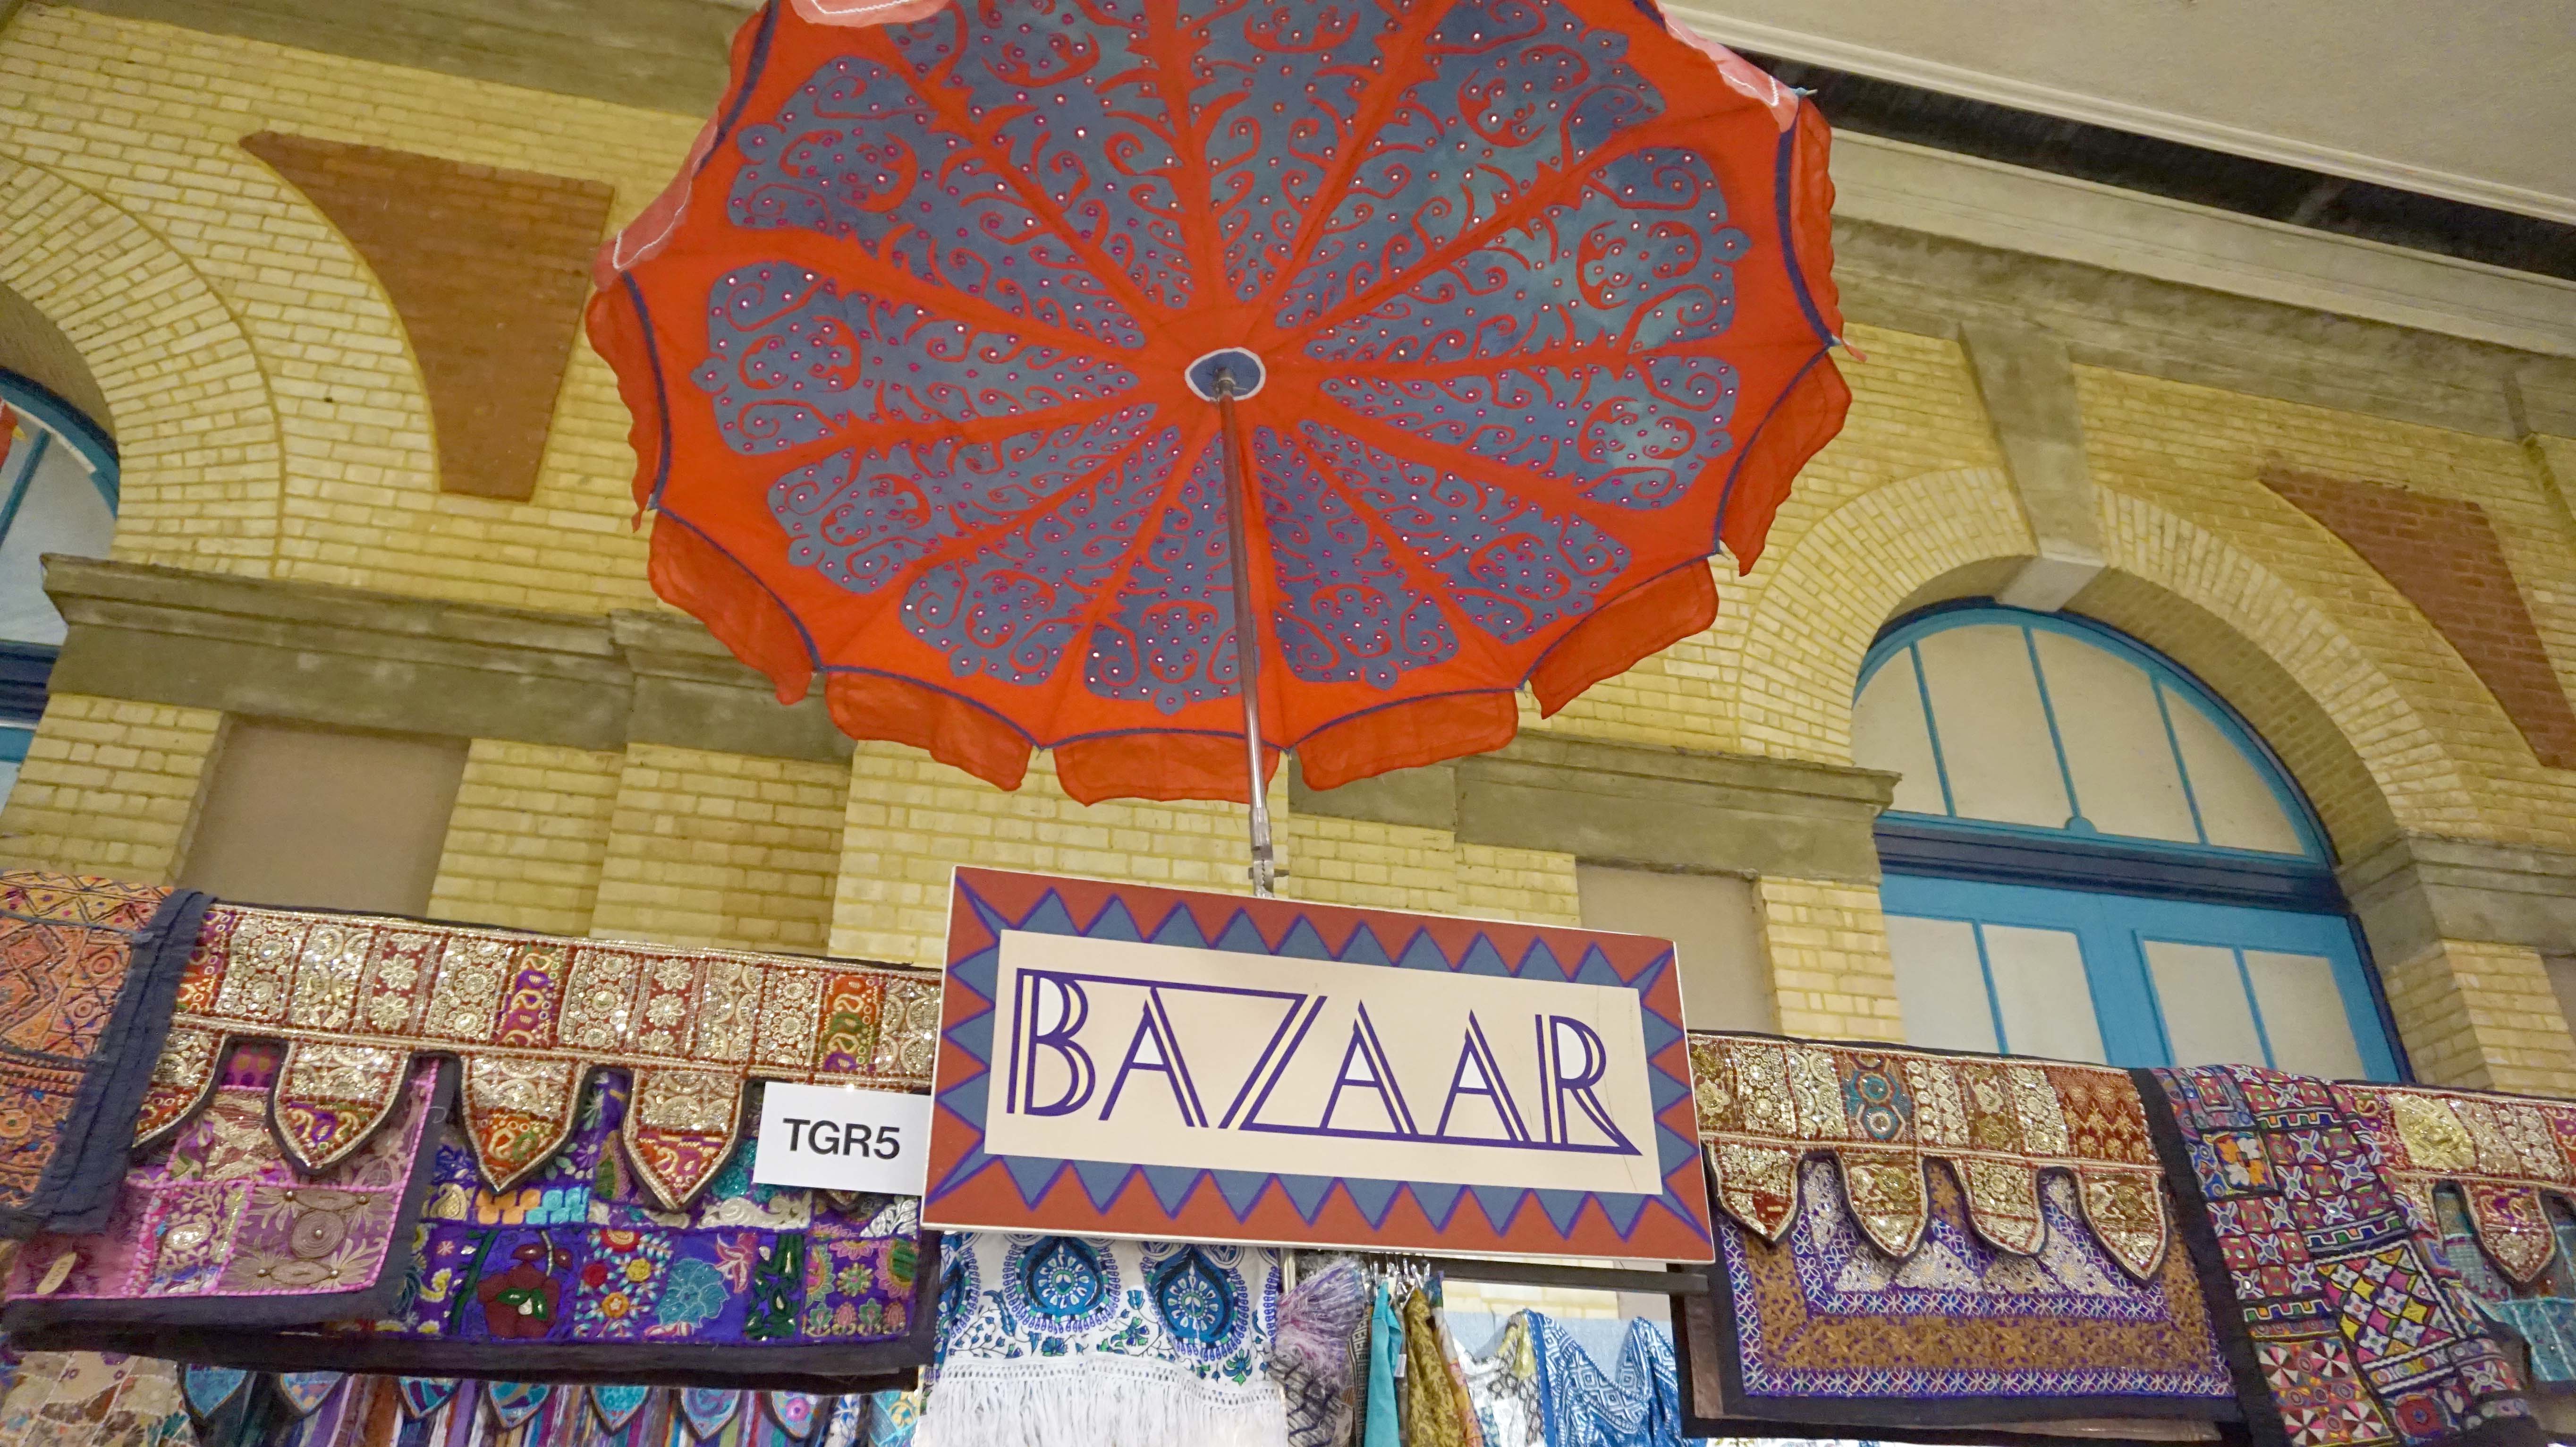 Bazaar Shop at the Knitting & Stitching Show 2017